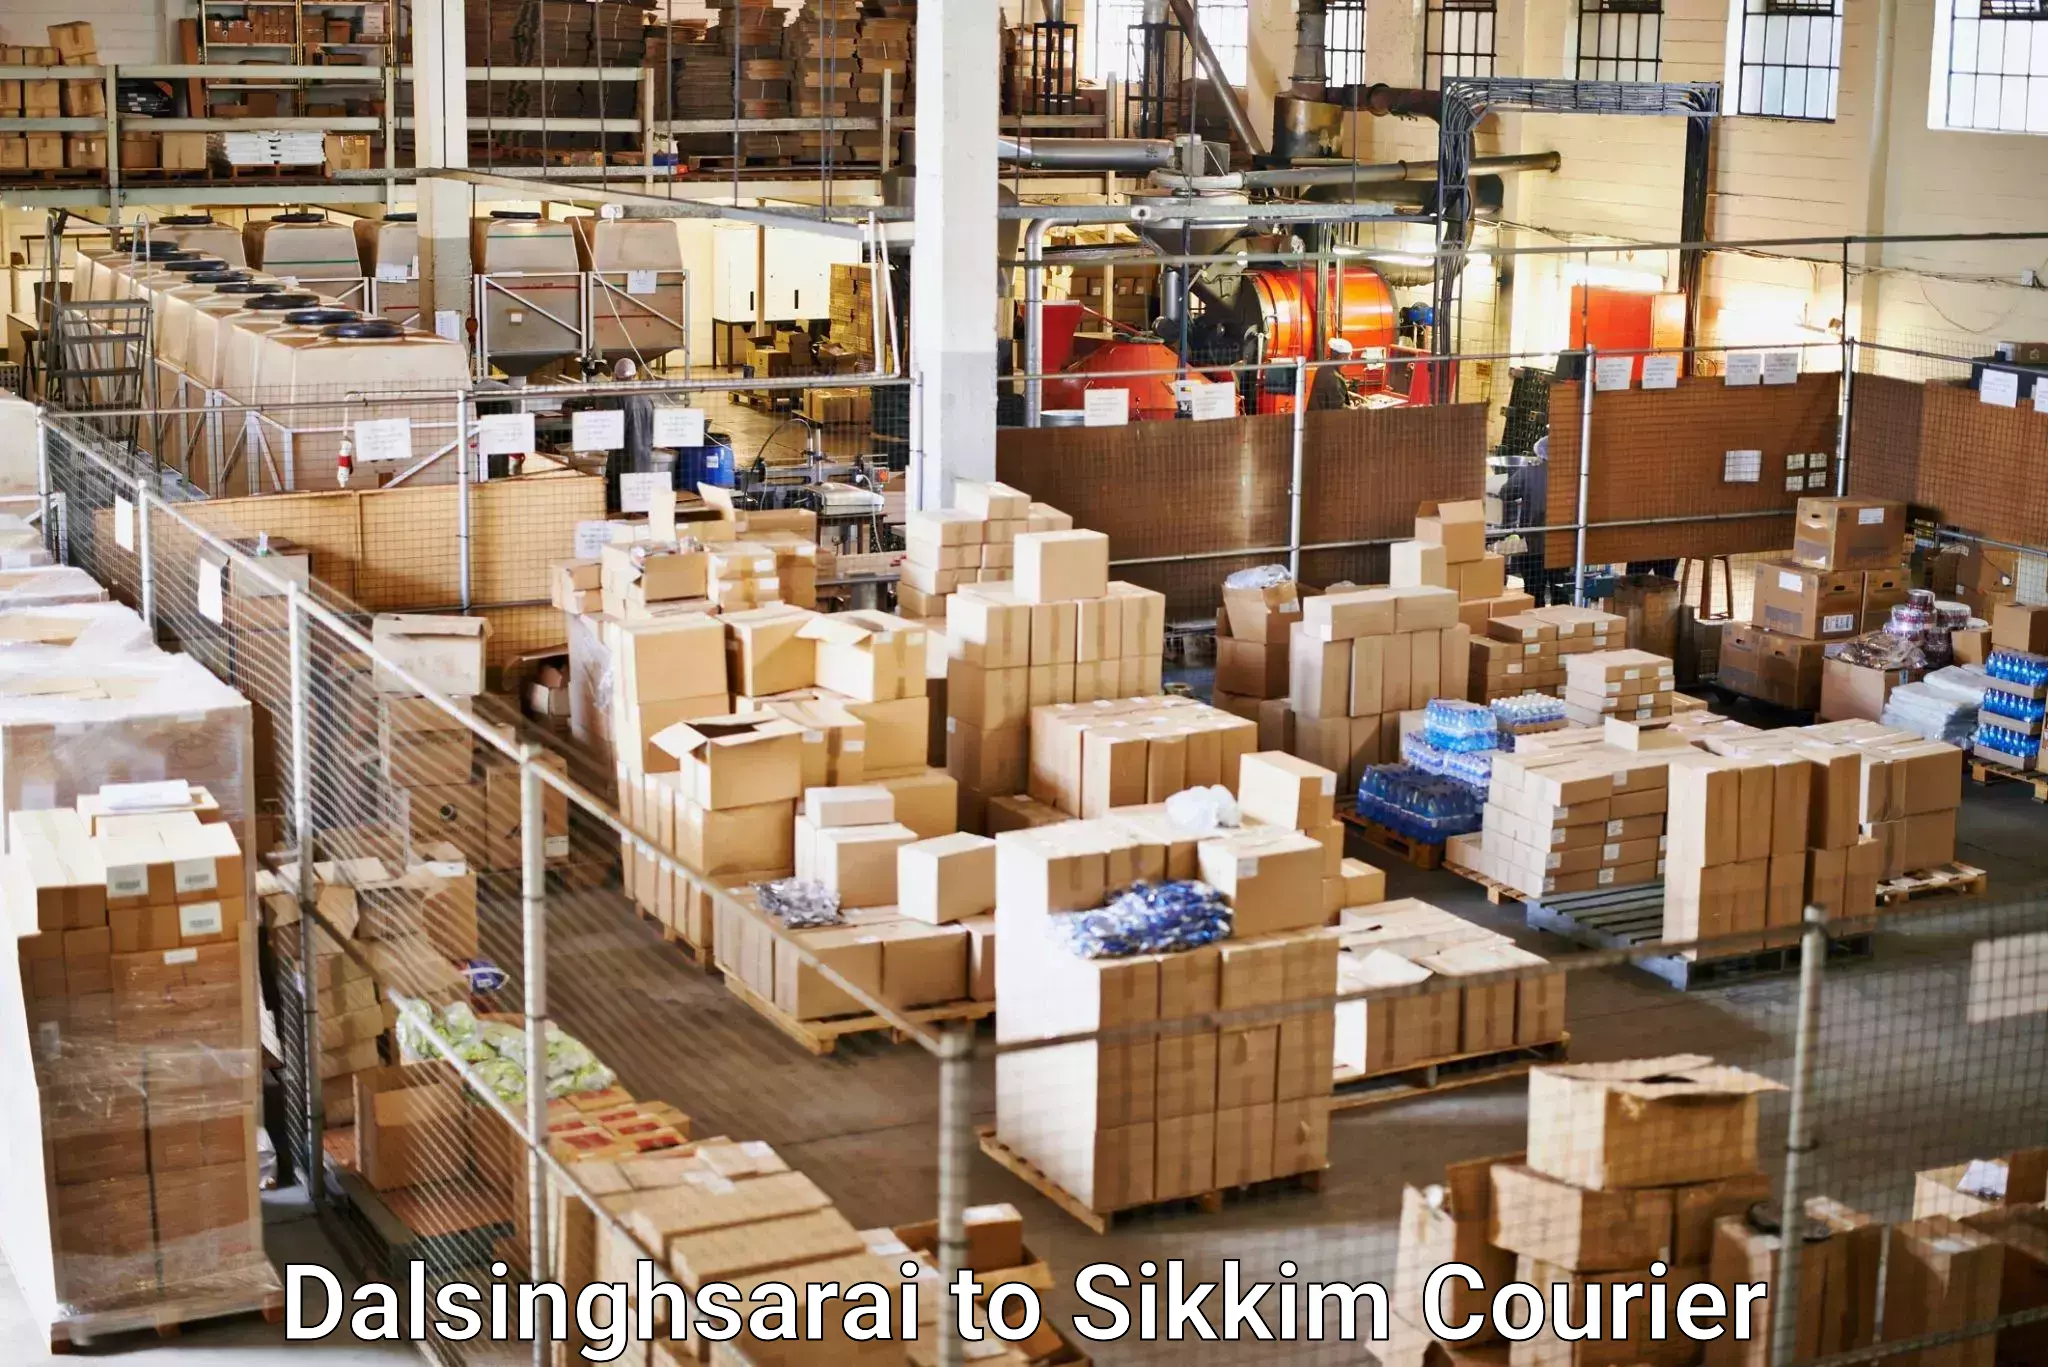 Express package handling in Dalsinghsarai to Sikkim